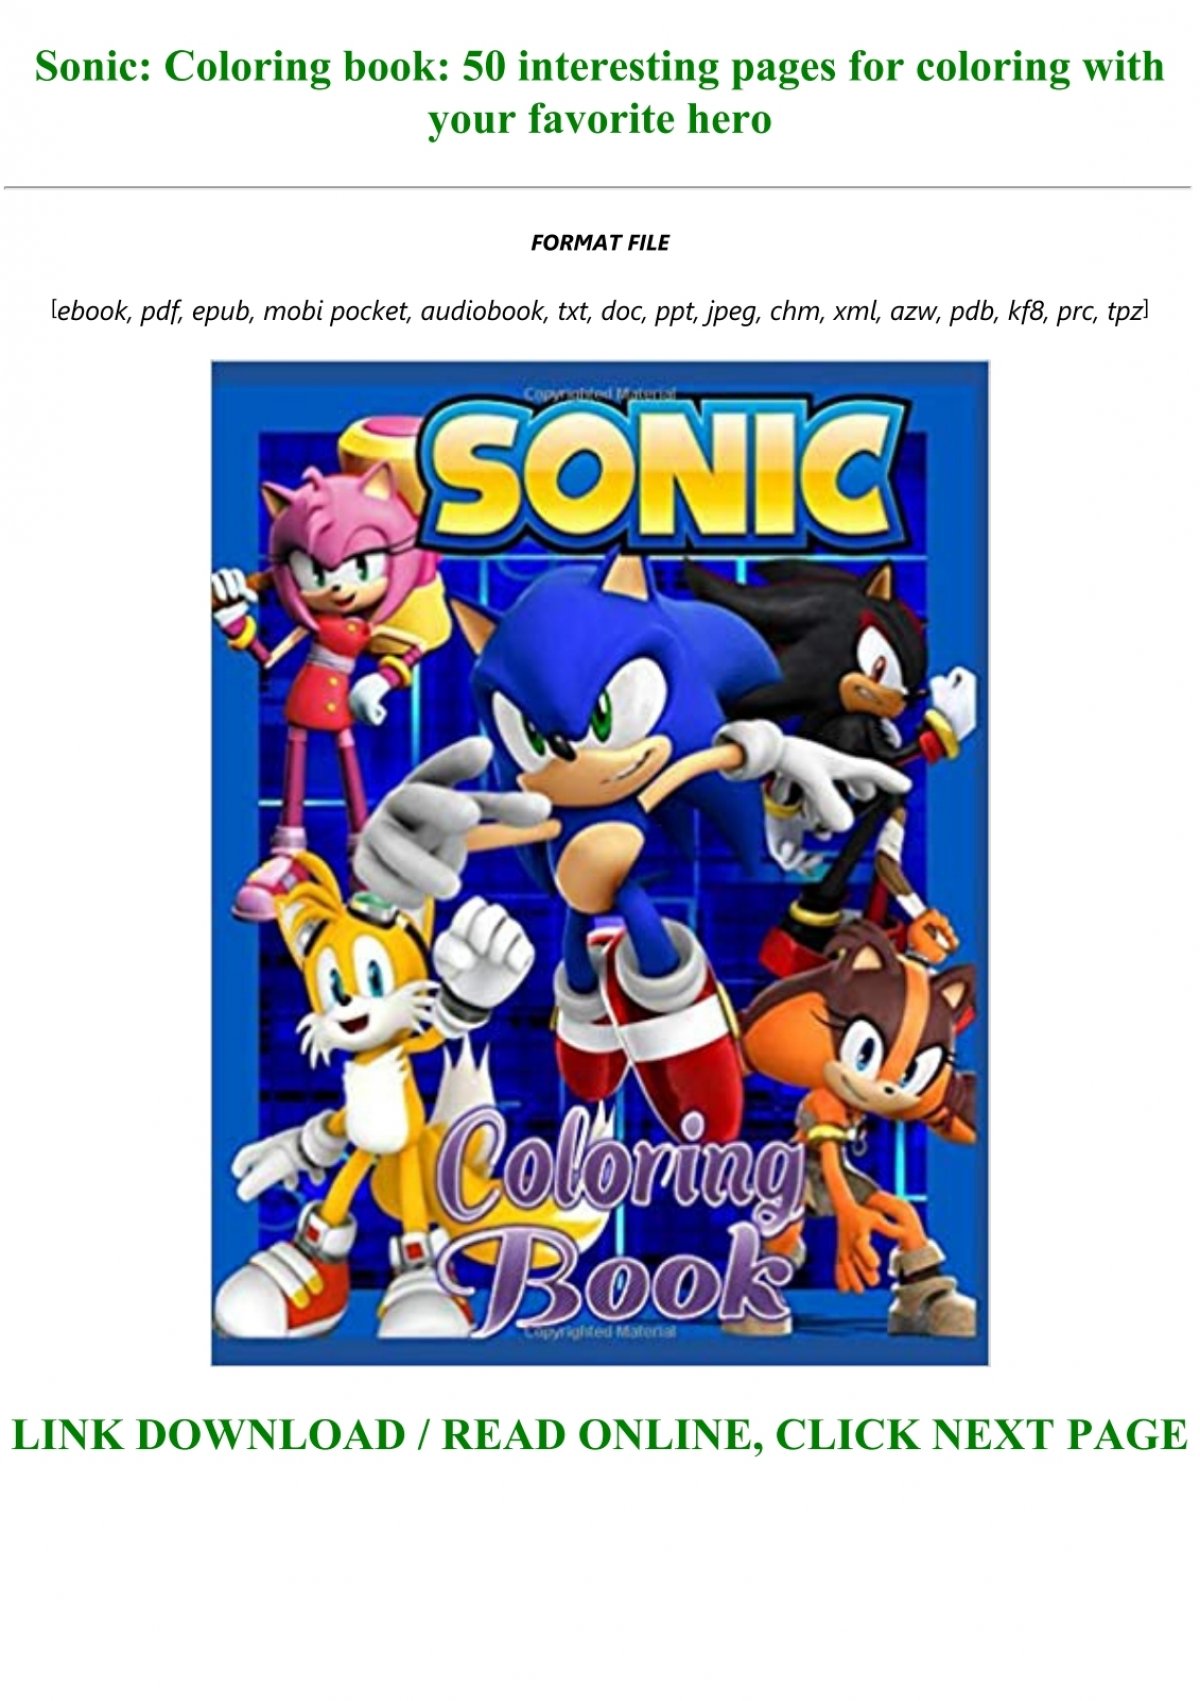 Download Download E B O O K Sonic Coloring Book 50 Interesting Pages For Coloring With Your Favorite Hero Full